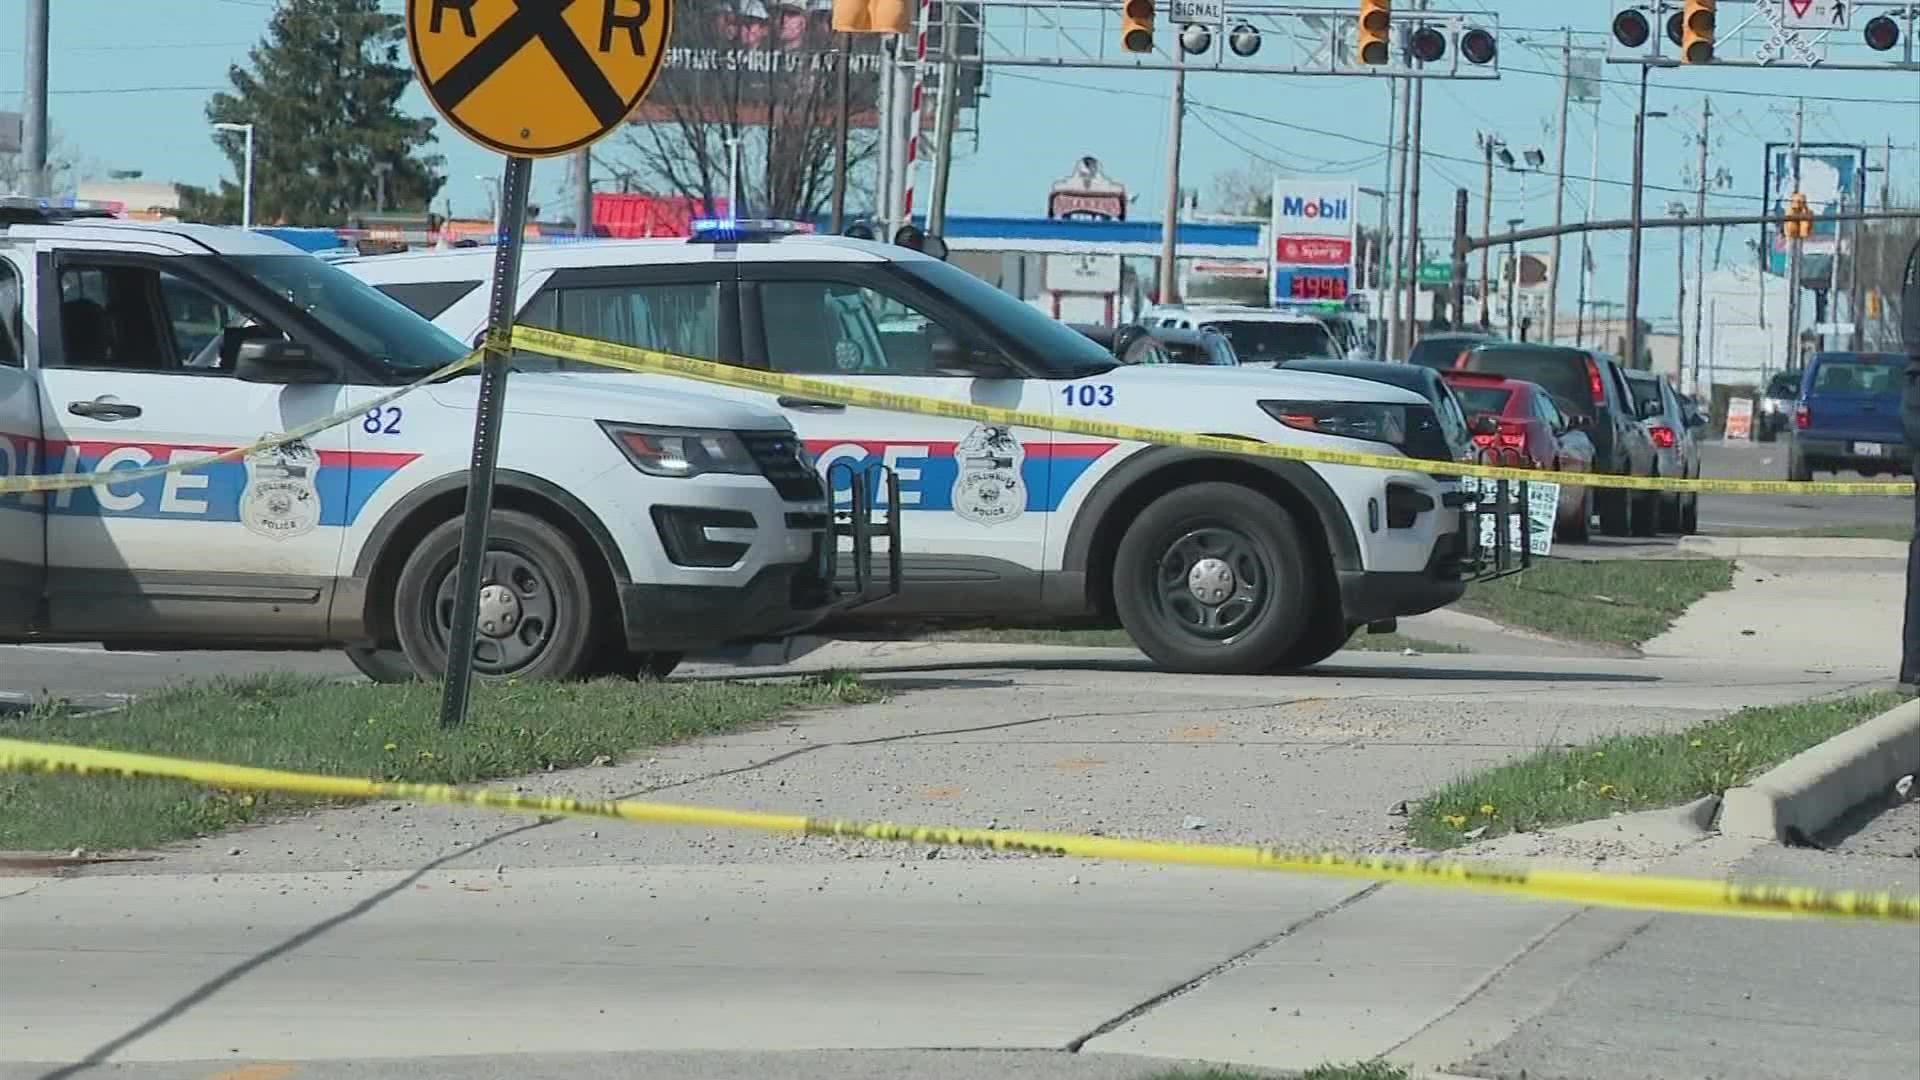 One of the shootings was deadly while a 3-year-old child was shot in north Columbus.